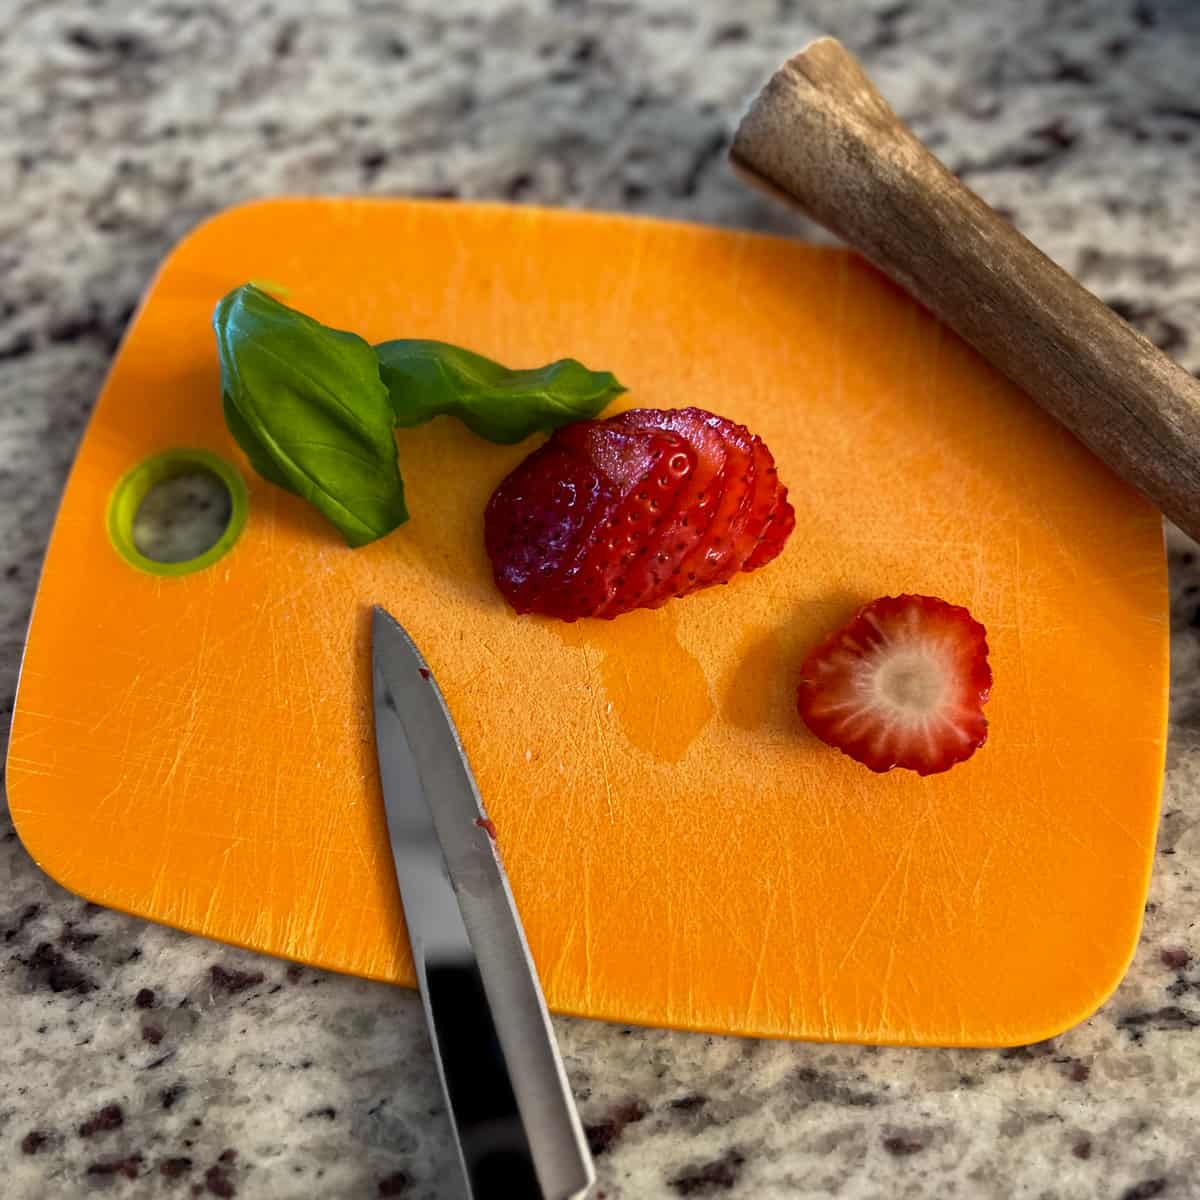 top side view of sliced strawberry, basil, knife and wooden muddle on a yellow cutting board